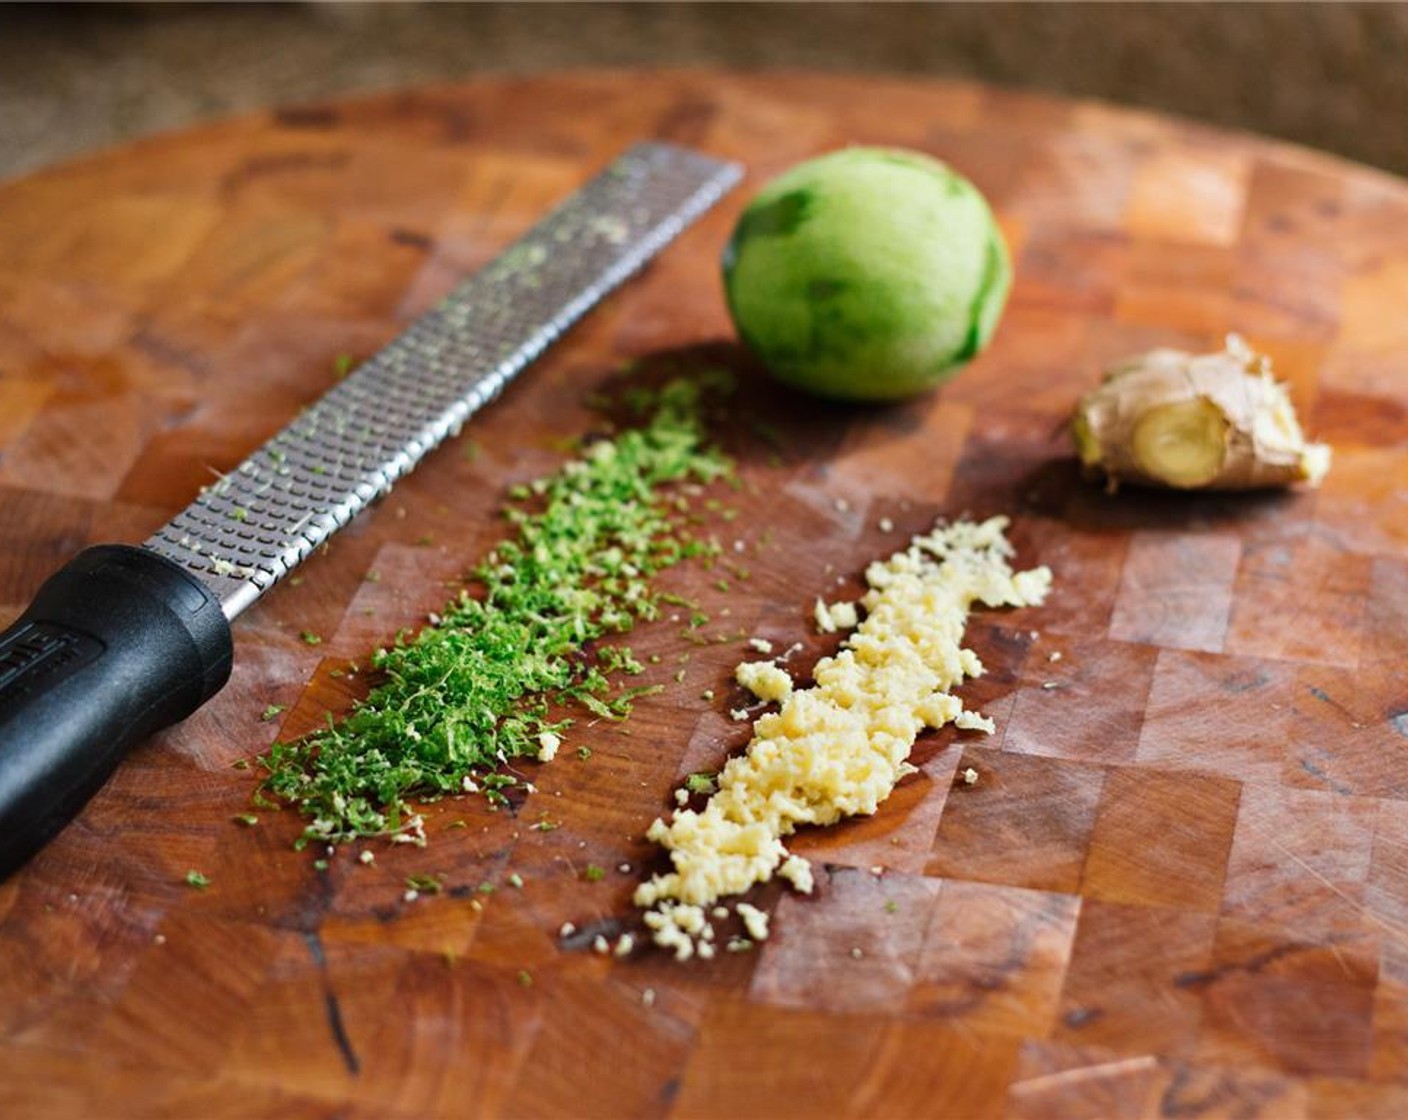 step 2 While the couscous cooks, grate the Fresh Ginger (1) and zest the Lime (1) with a microplane grater. Whisk the ginger, lime zest, Agave Syrup (1 tsp), Grapeseed Oil (1/4 cup), and lime juice together in a small bowl. Add Salt (1/4 tsp) and Ground Black Pepper (1/4 tsp).